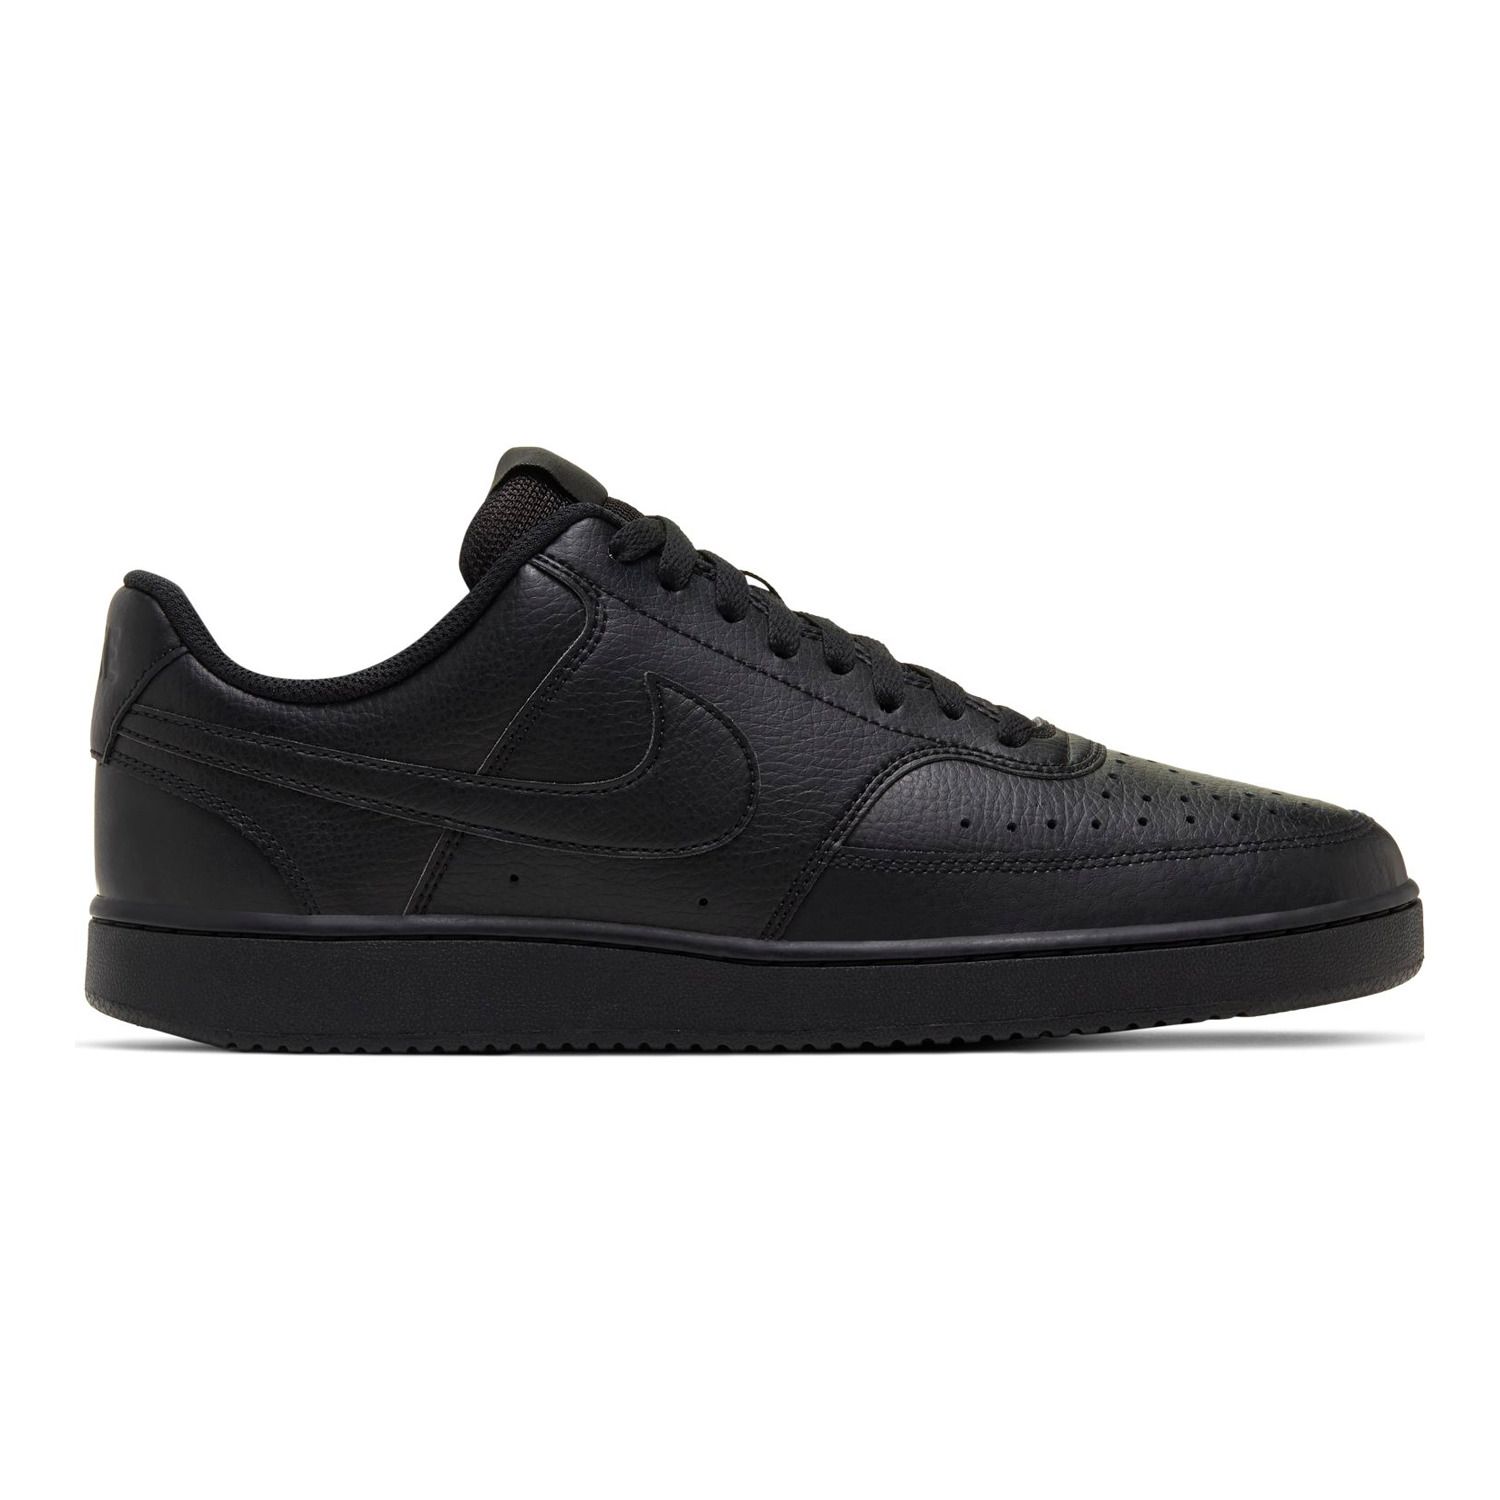 all black low top nikes